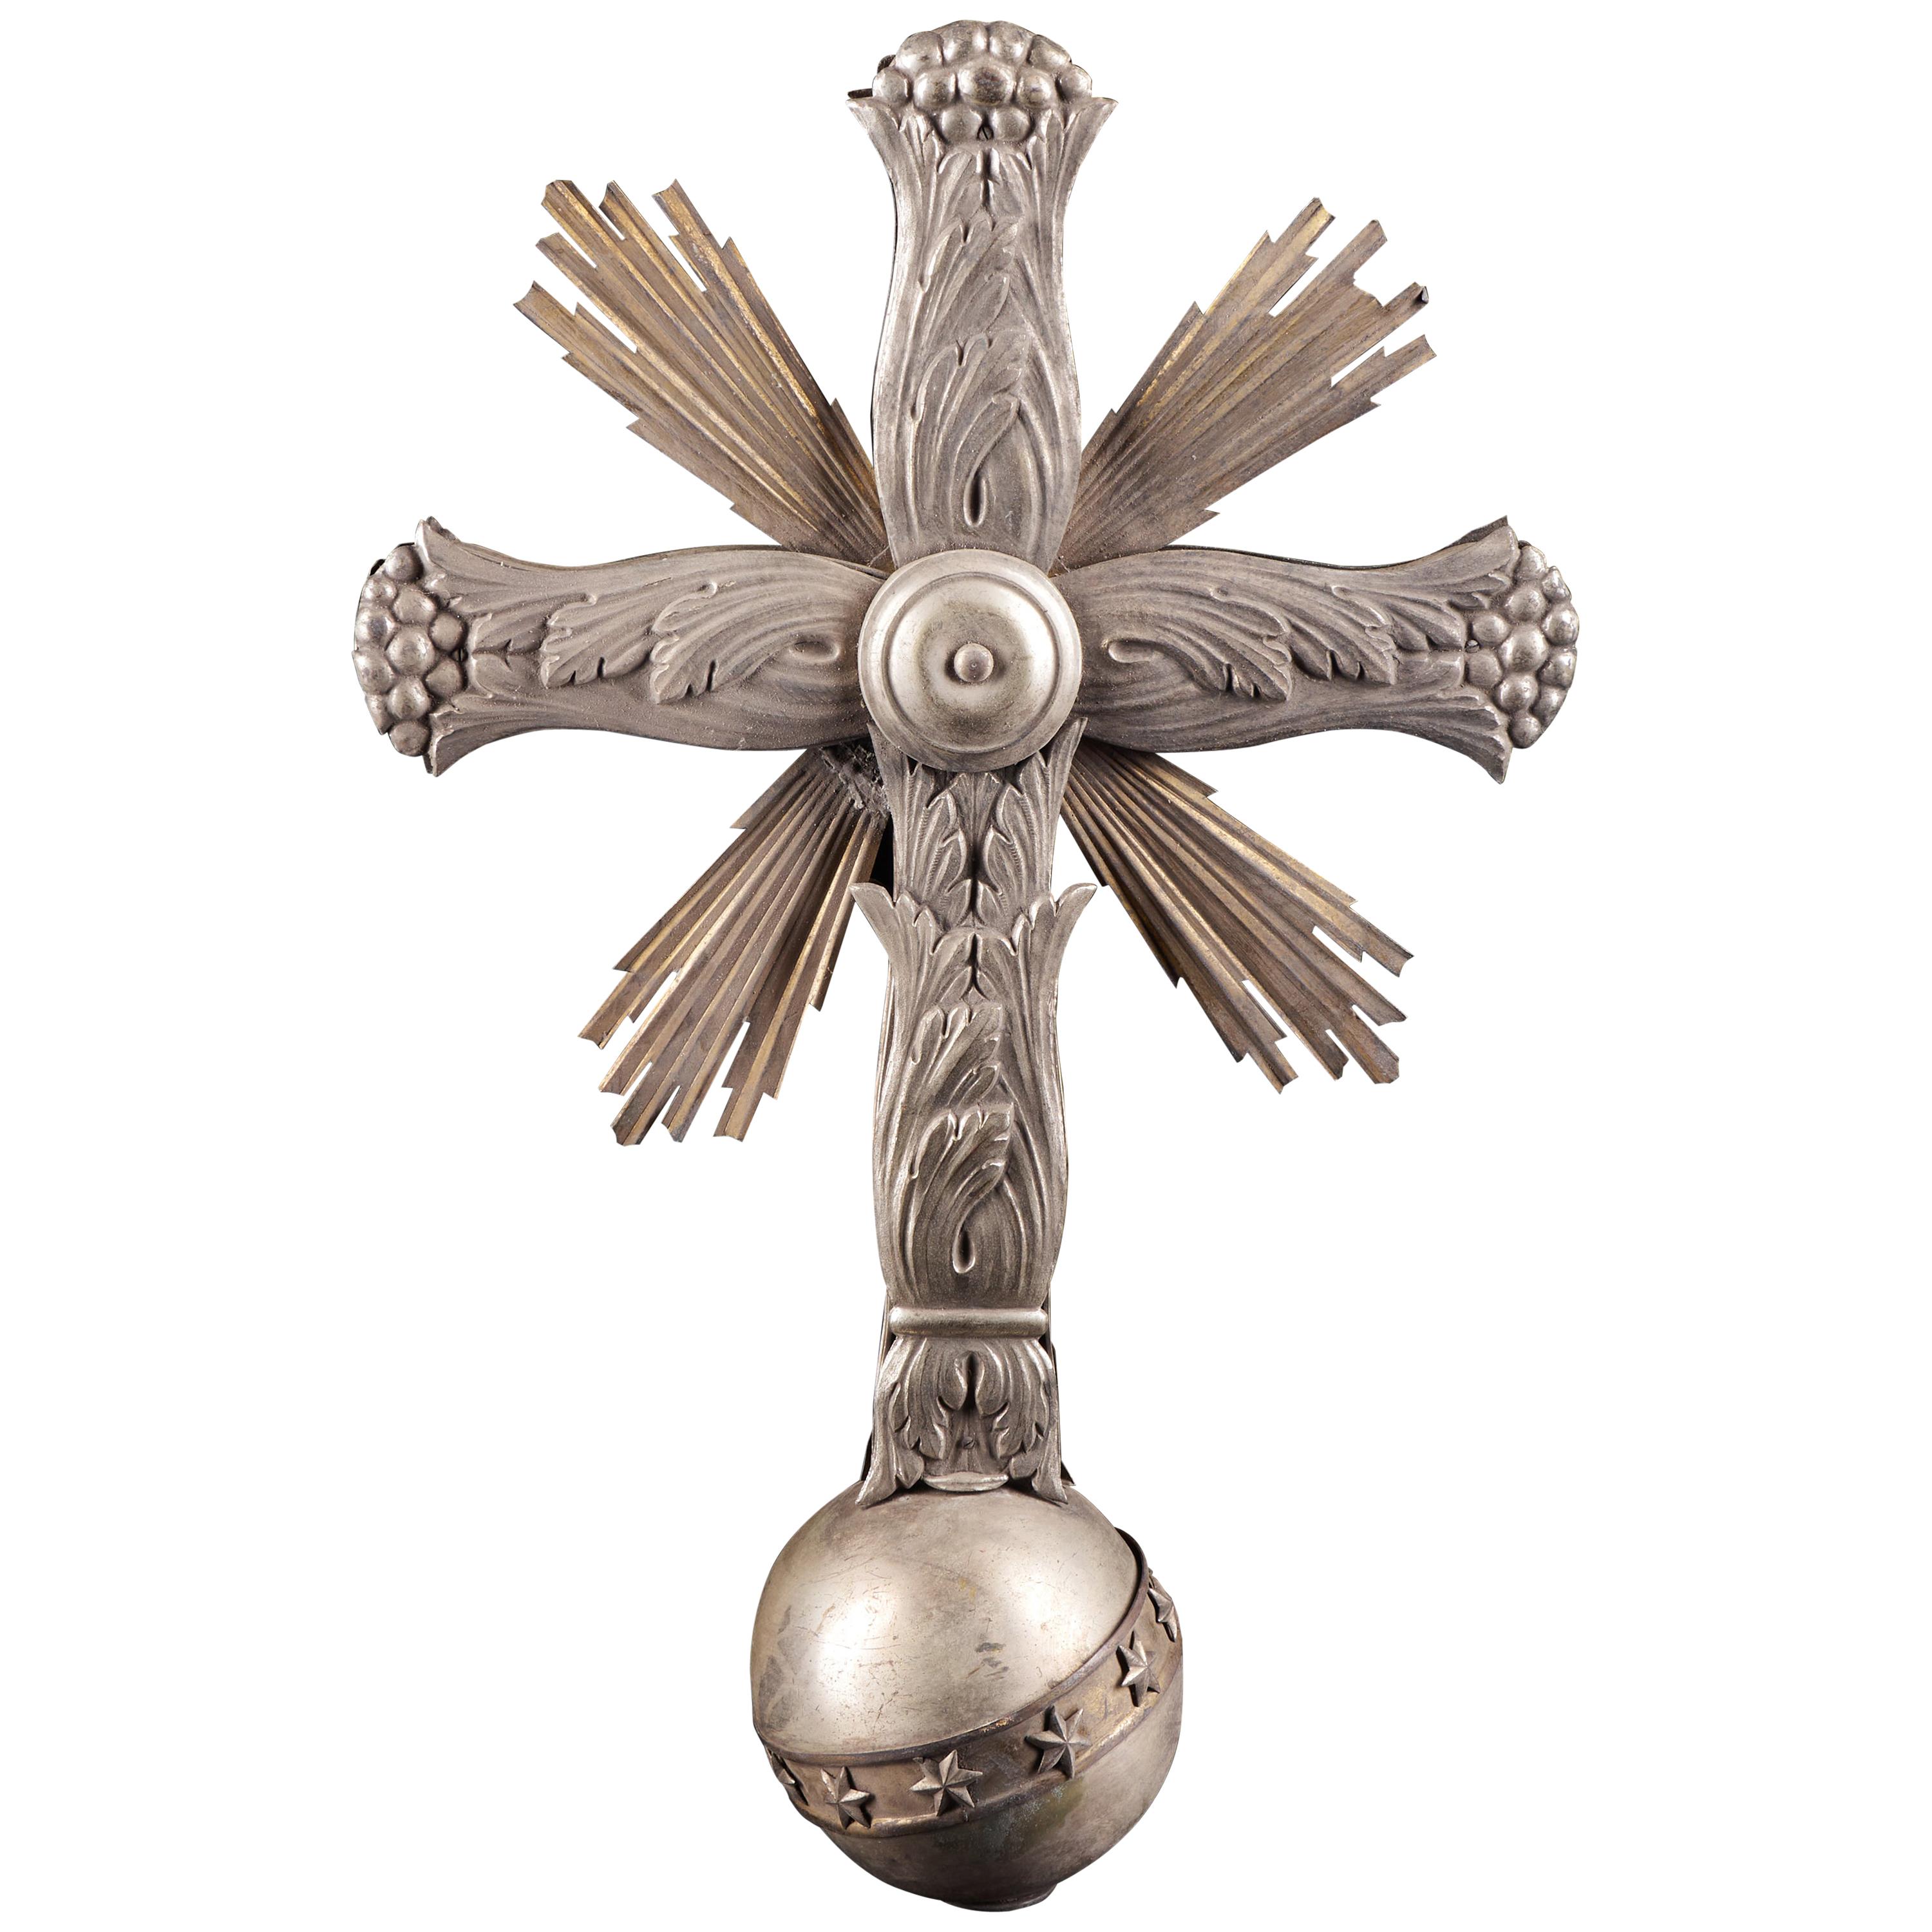 Light and Elaborately Decorated Antique Metal Cross on a Bowl